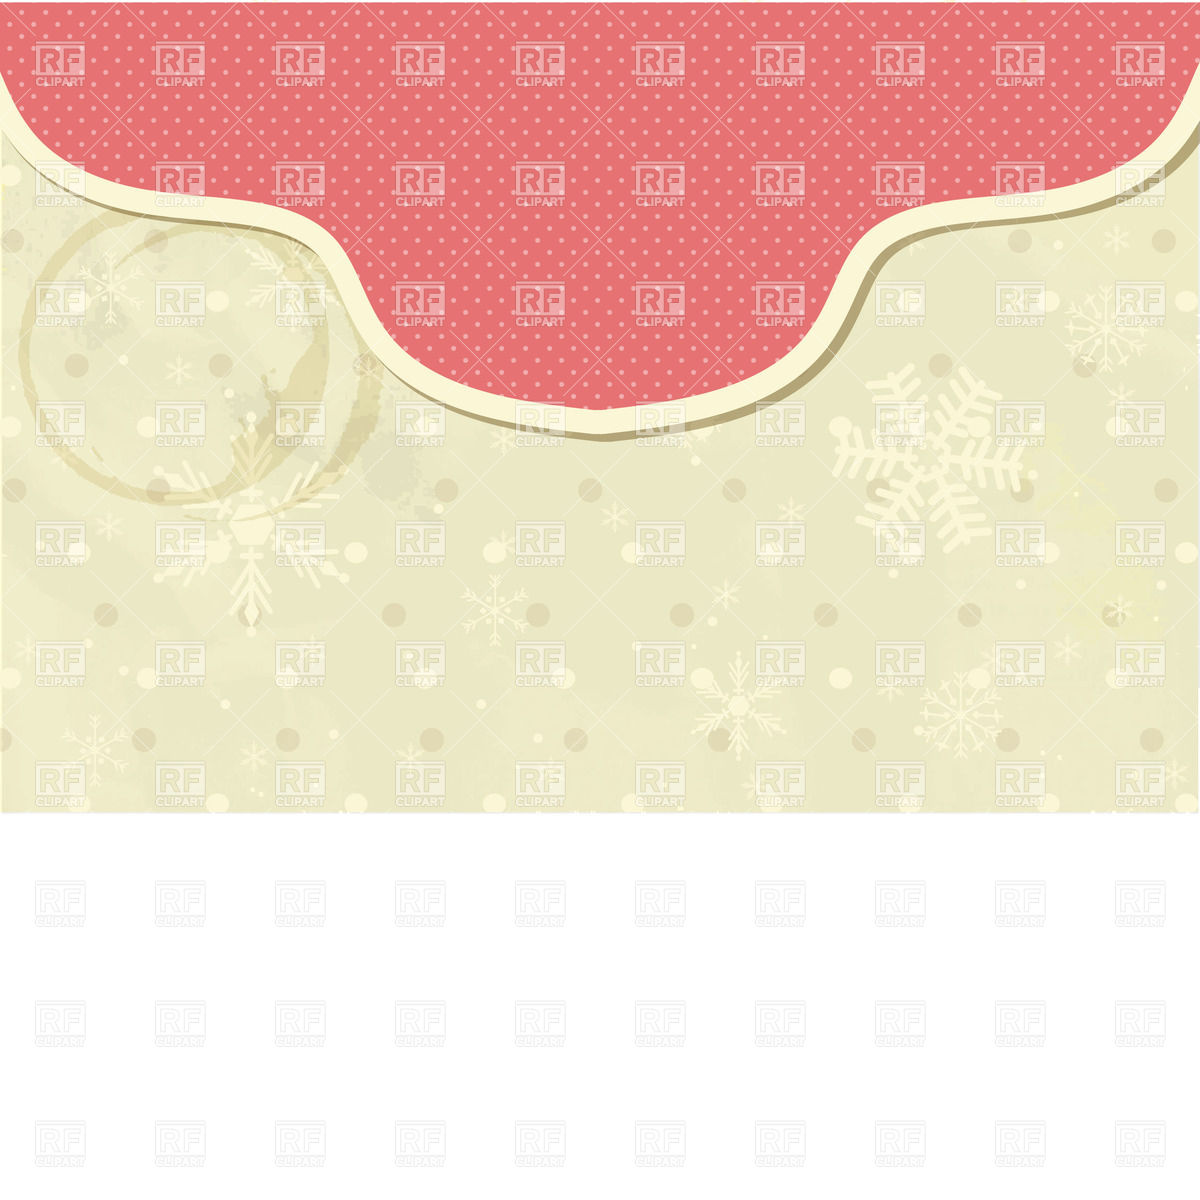 Retro Frame For Text On Polka Dot Background Borders And Frames